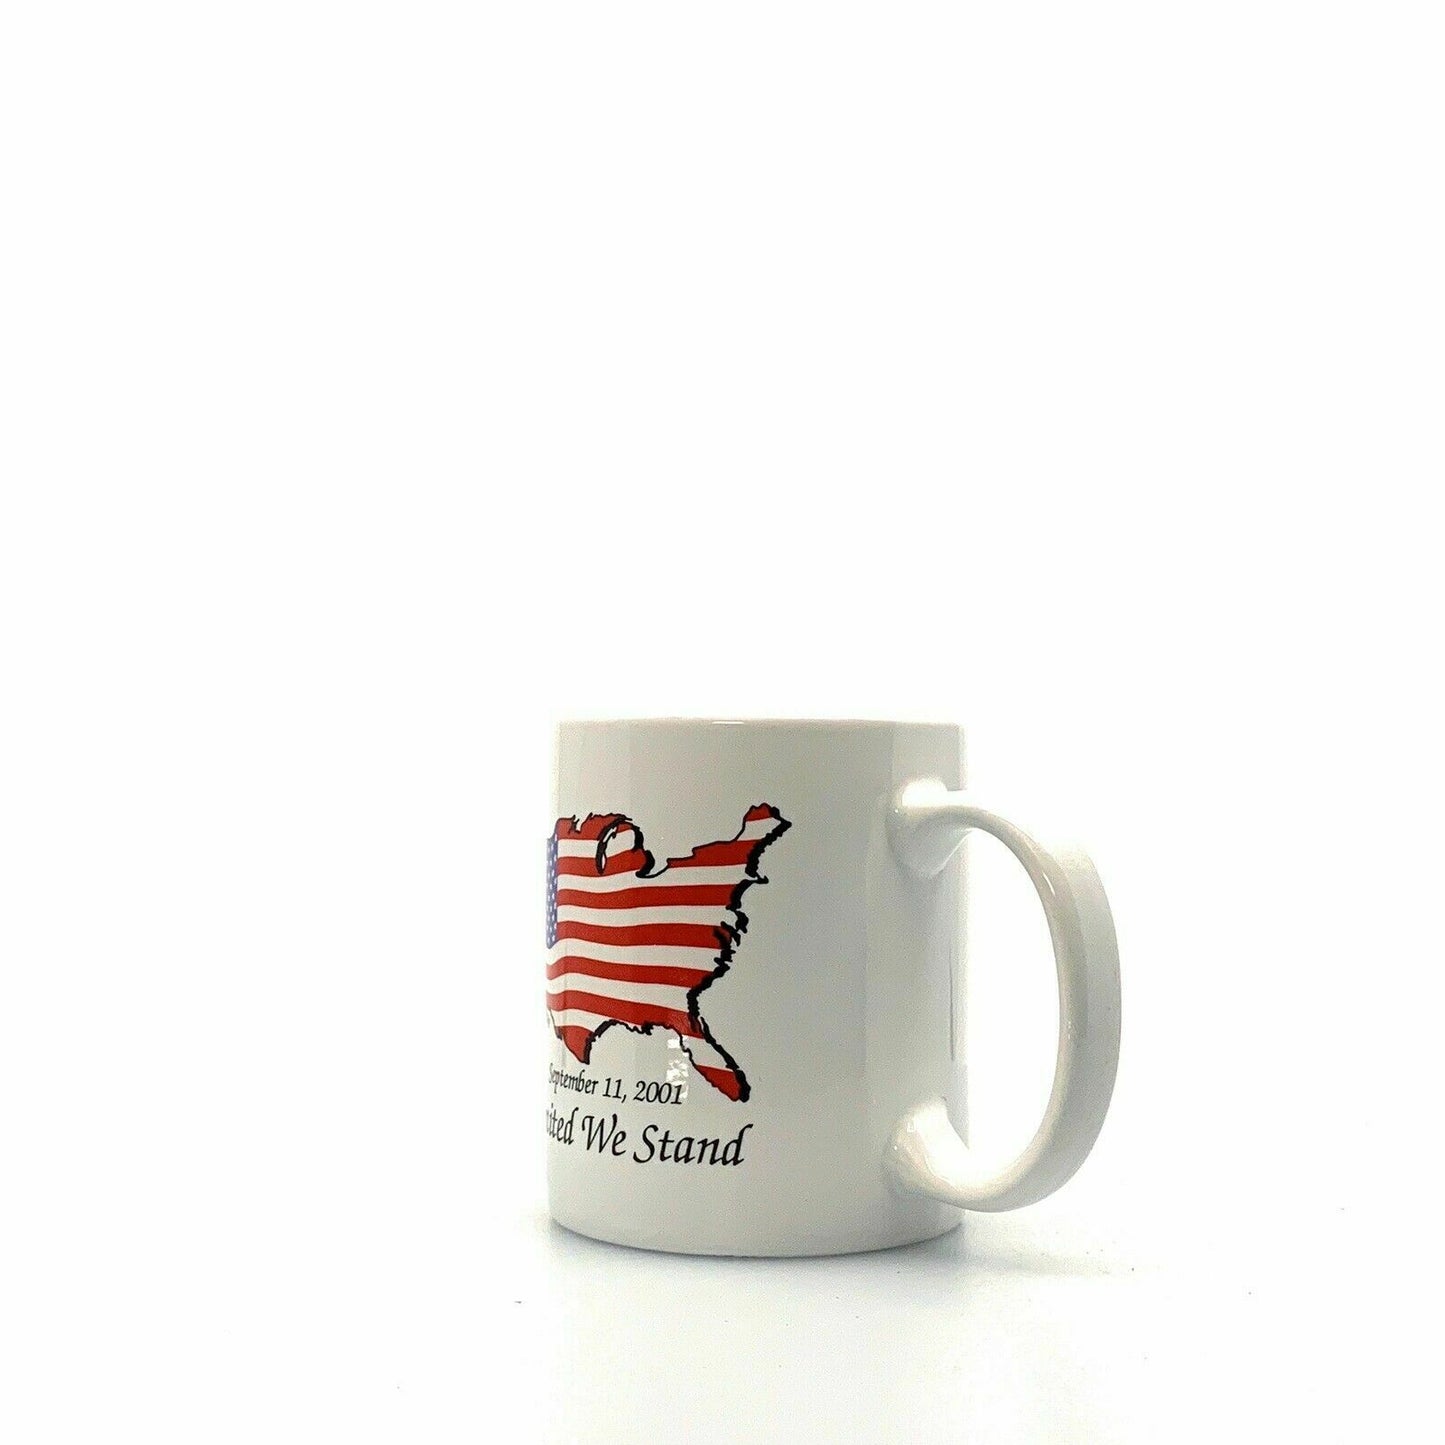 September 11, 2001 United We Stand Stars And Stripes Red White & Blue Cup Mug